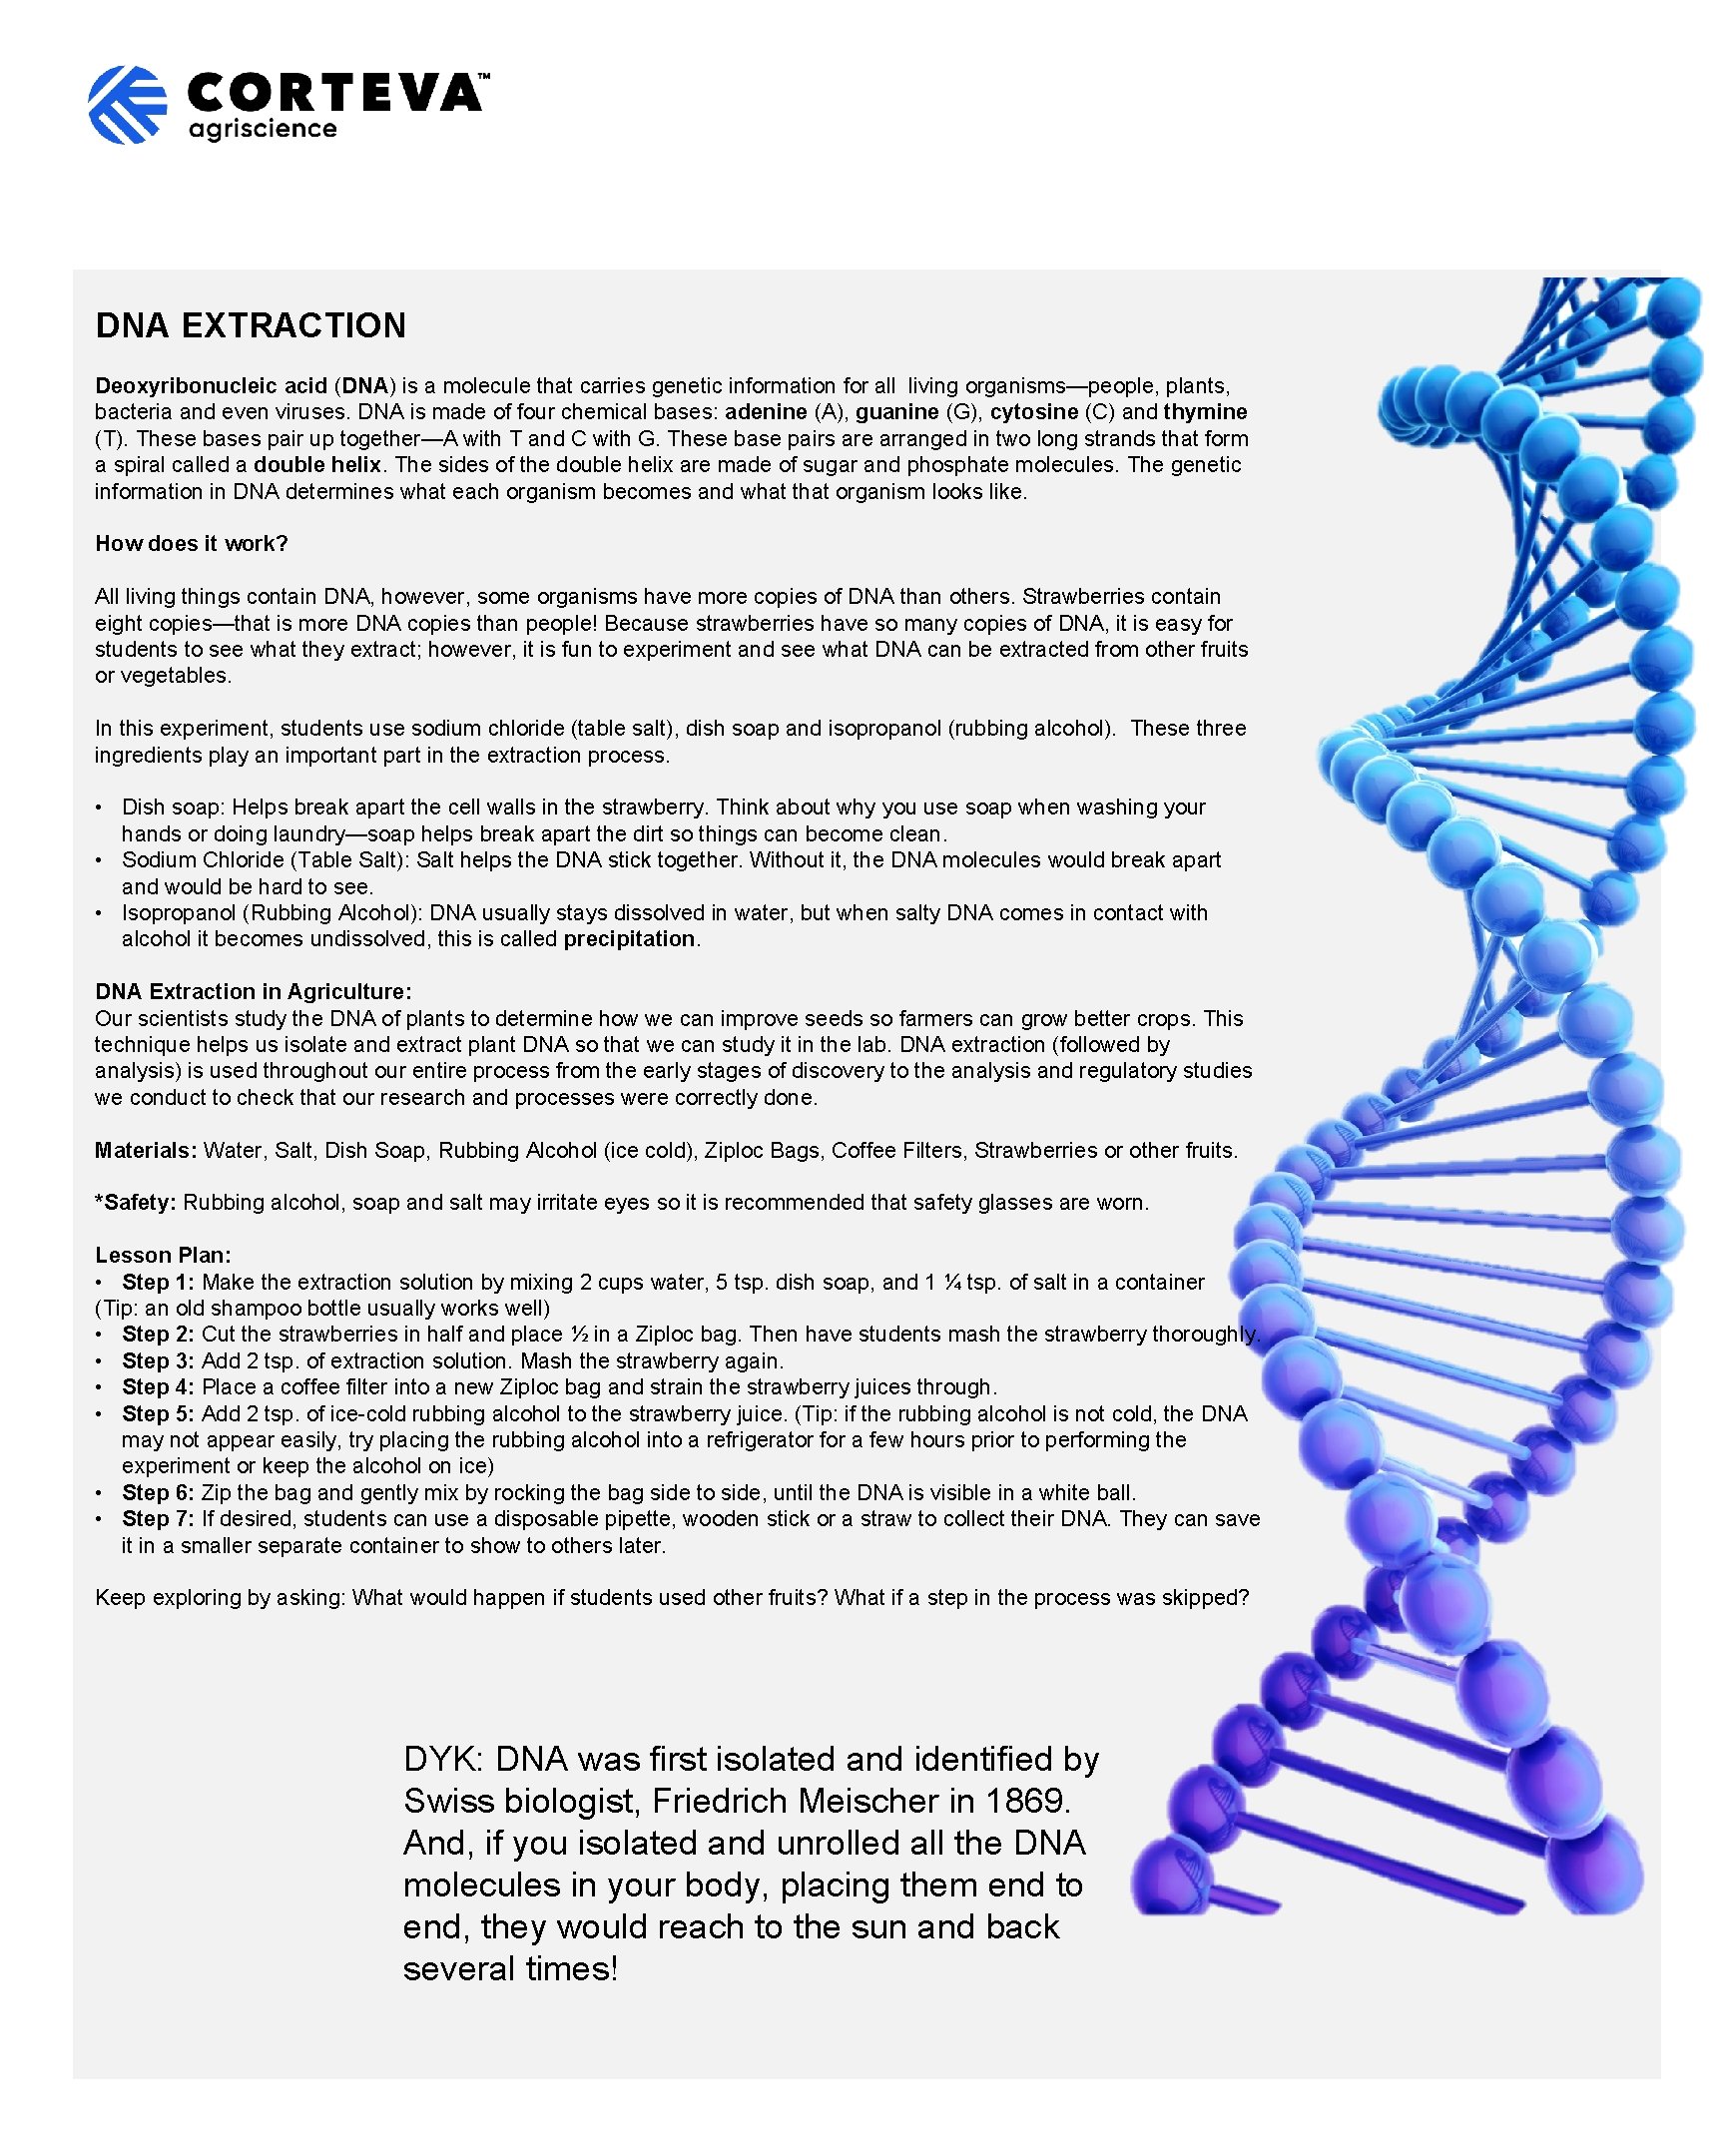 DNA EXTRACTION Deoxyribonucleic acid (DNA) is a molecule that carries genetic information for all